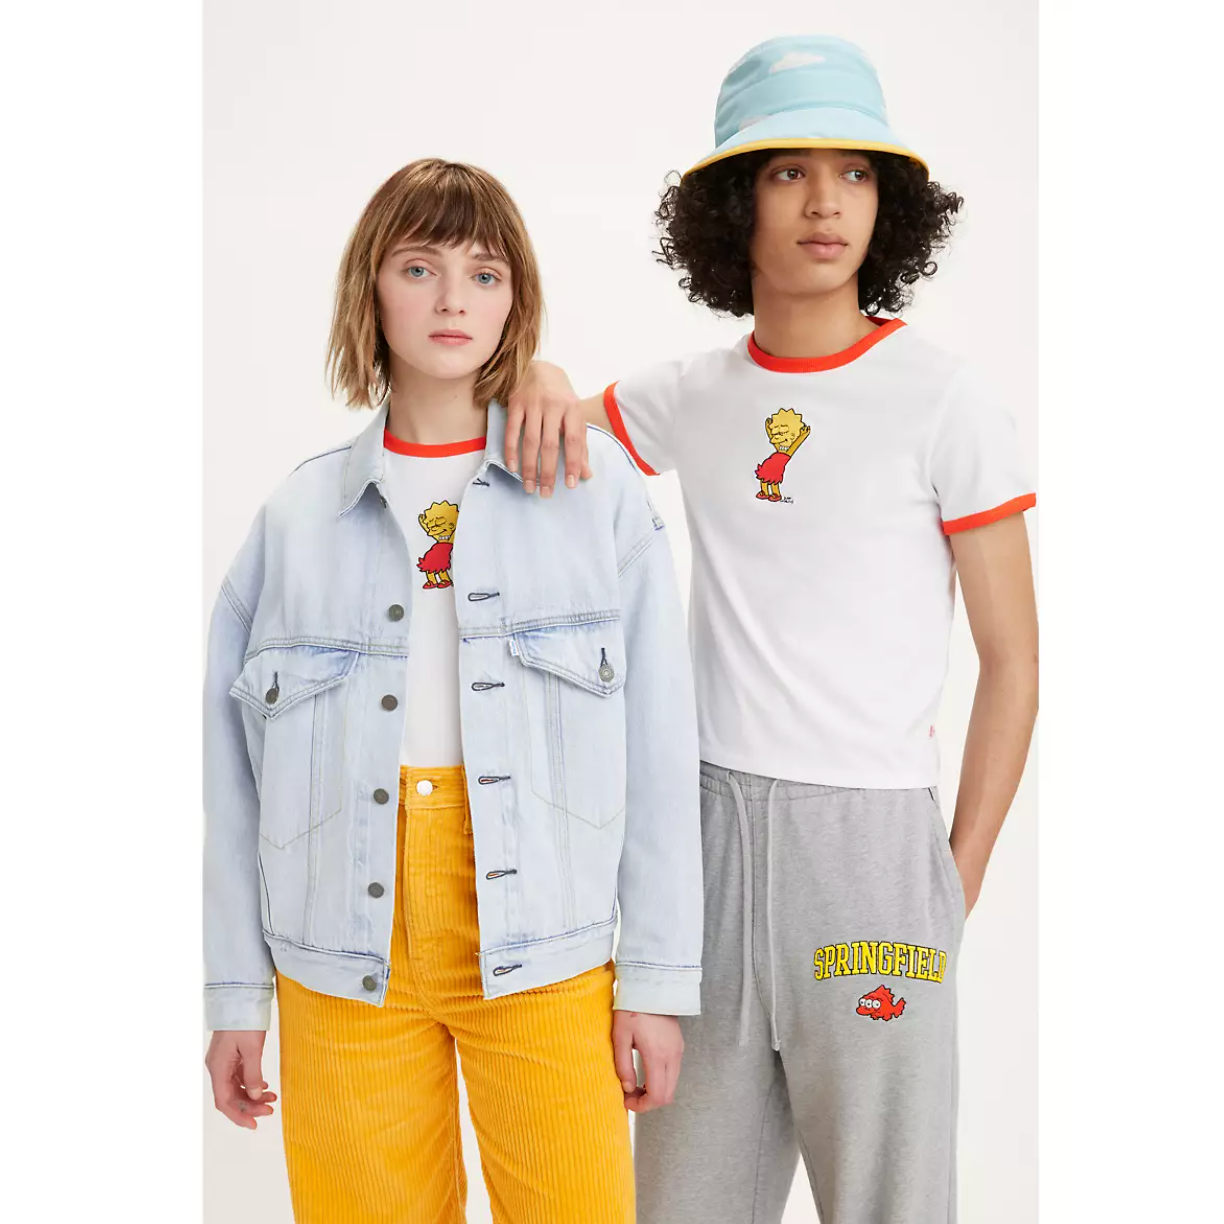 The Levi's x The Simpsons Collab Is Here and It's Instantly Iconic